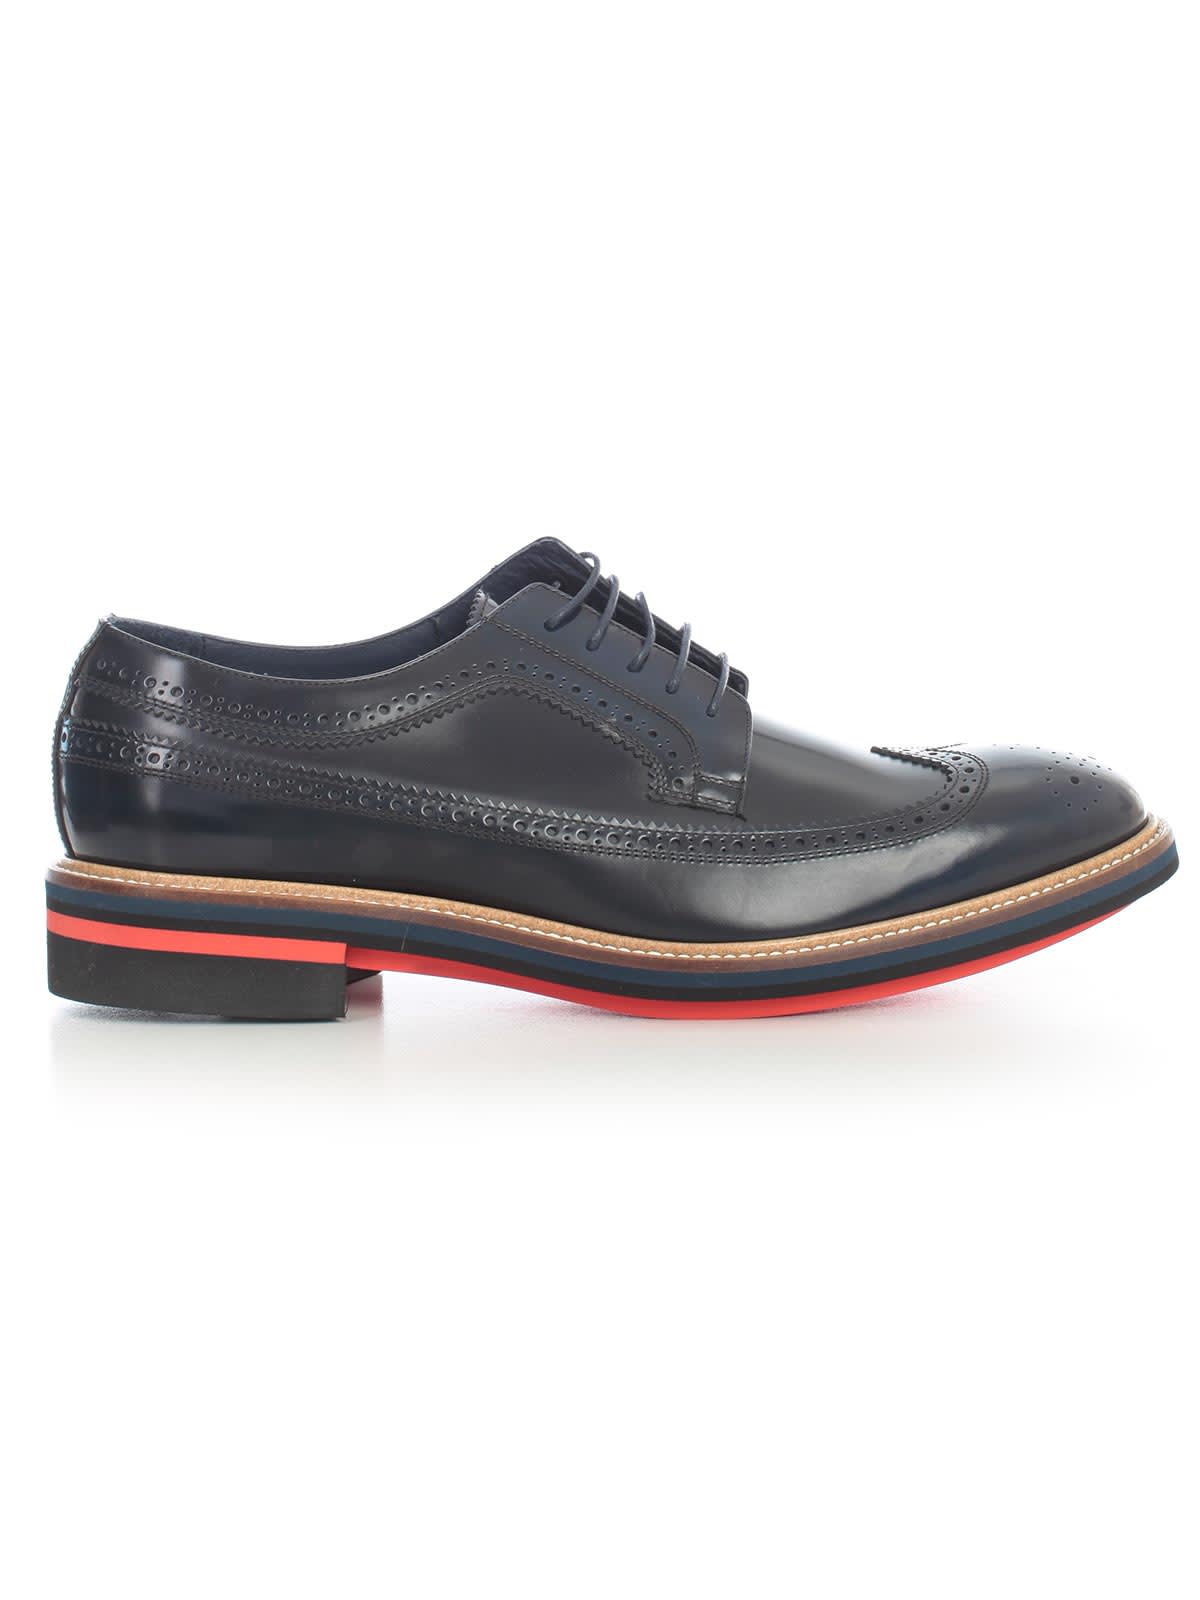 PAUL SMITH CLASSIC SHOES CHASE,11221141